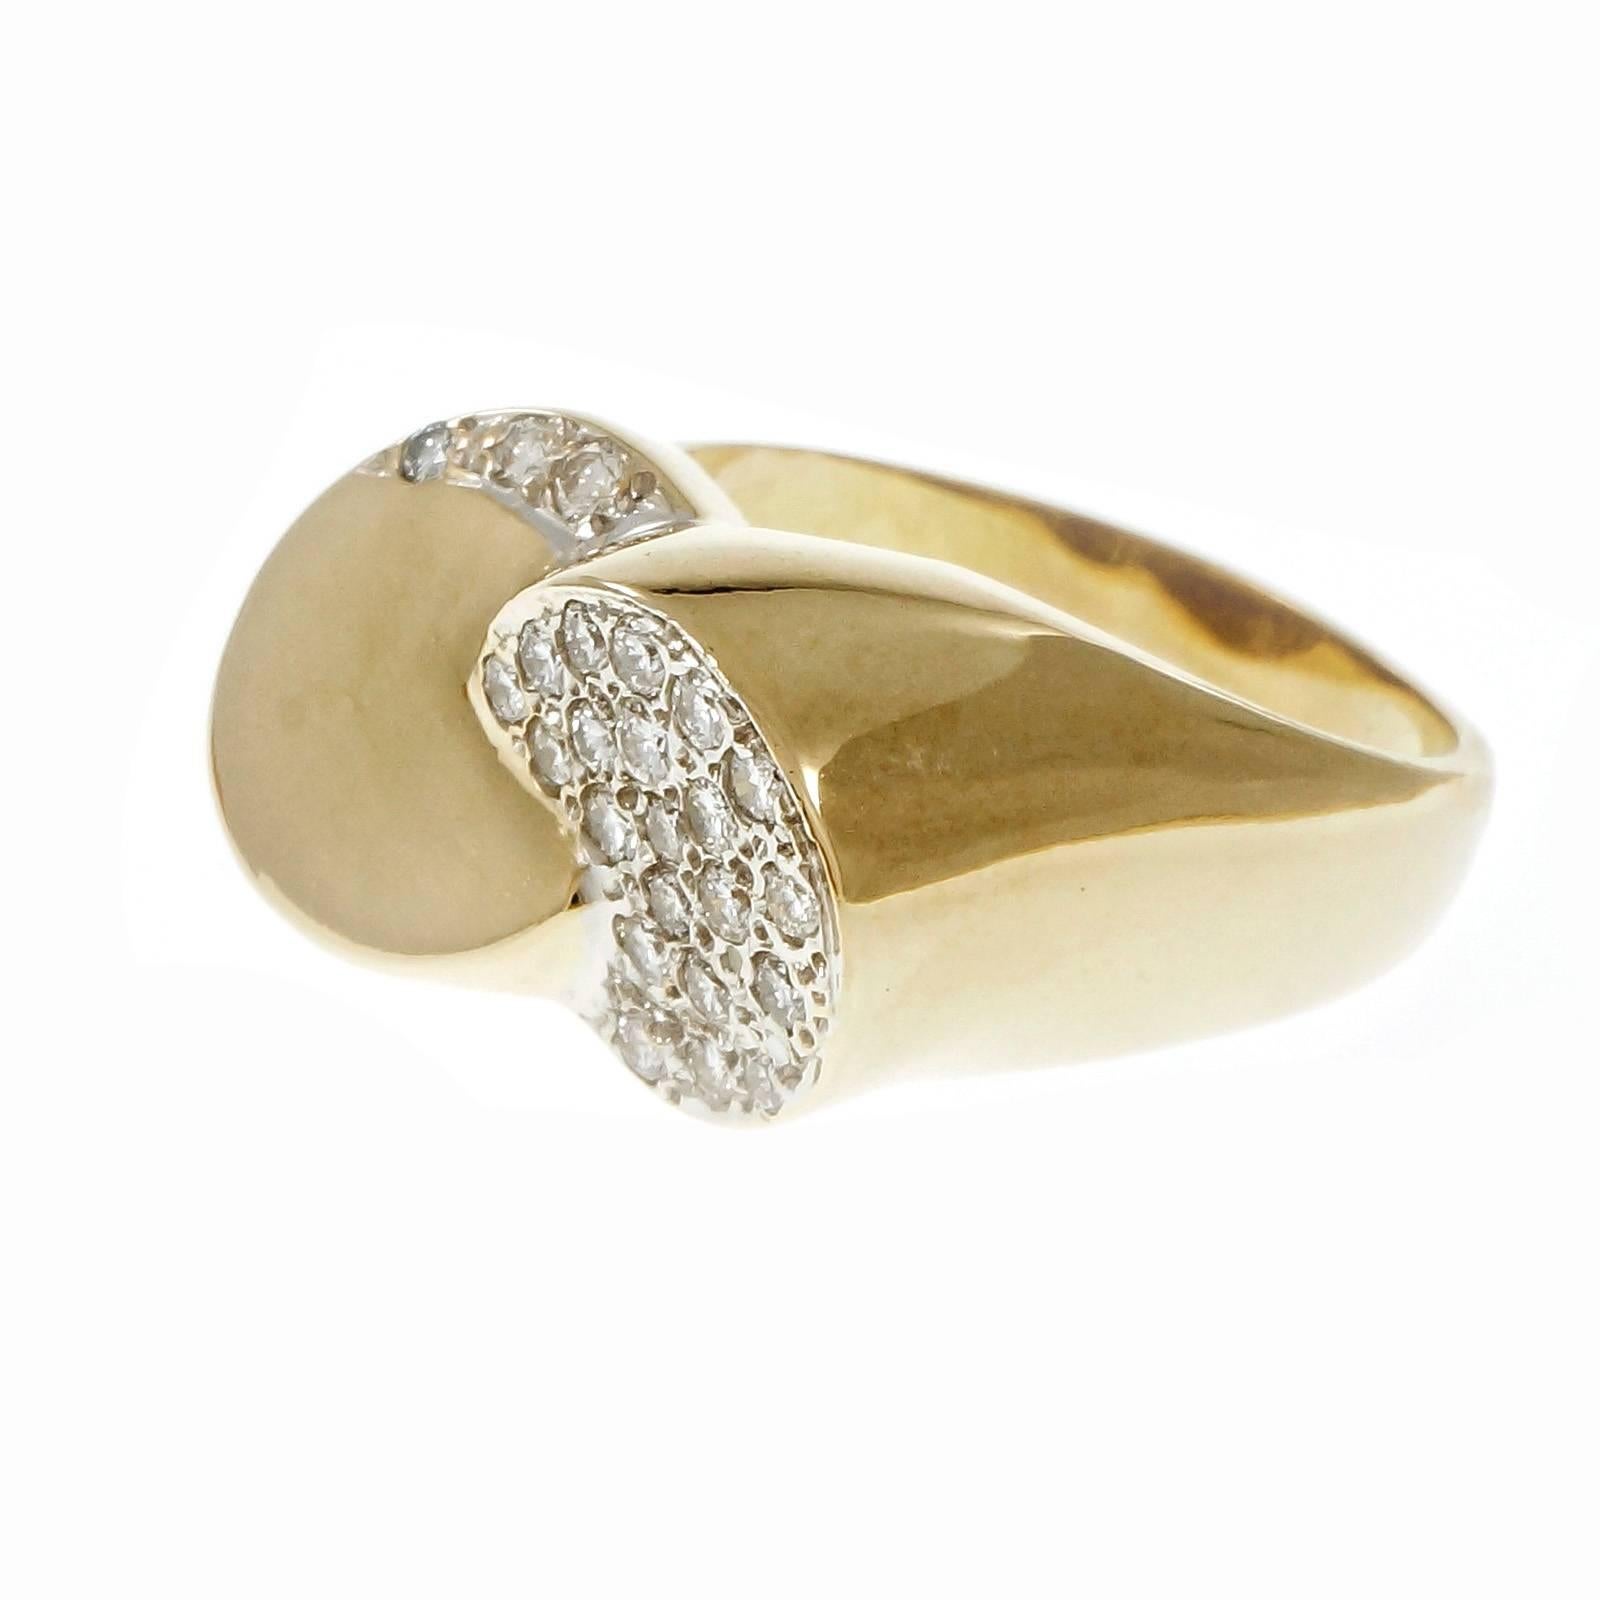 Diamond Pave Dome Swirl 14k Gold Cocktail Ring. Circa 1960’s

23 round full cut diamonds, approx. total weight .30cts, G, VS – SI
14k yellow gold
Tested: 14k
7.7 grams
Width at top: 11.64mm
Height at top: 8.22mm
Width at Bottom: 3.70mm
Size